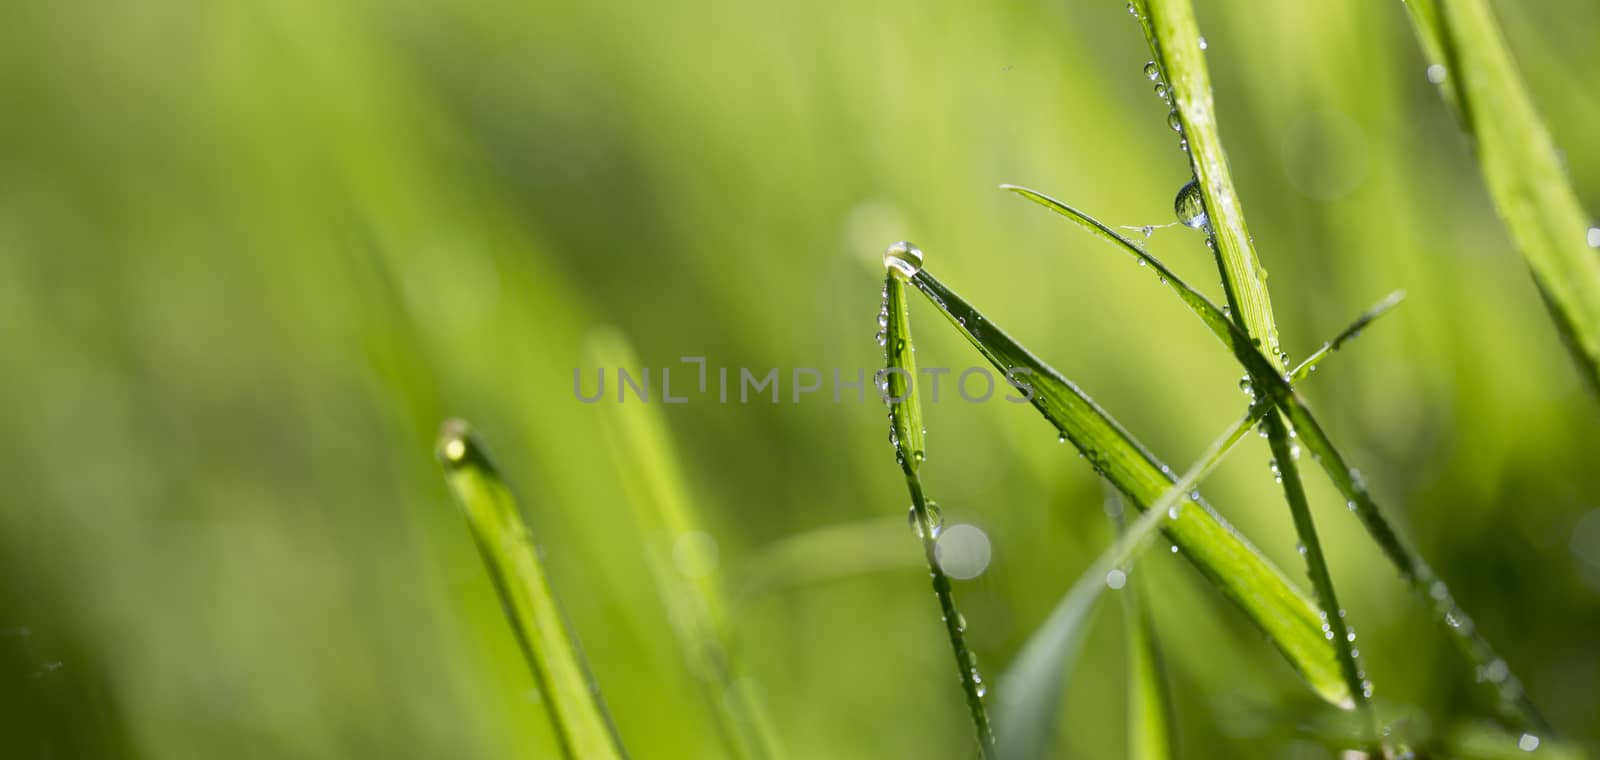 Blade of grass in morning dew